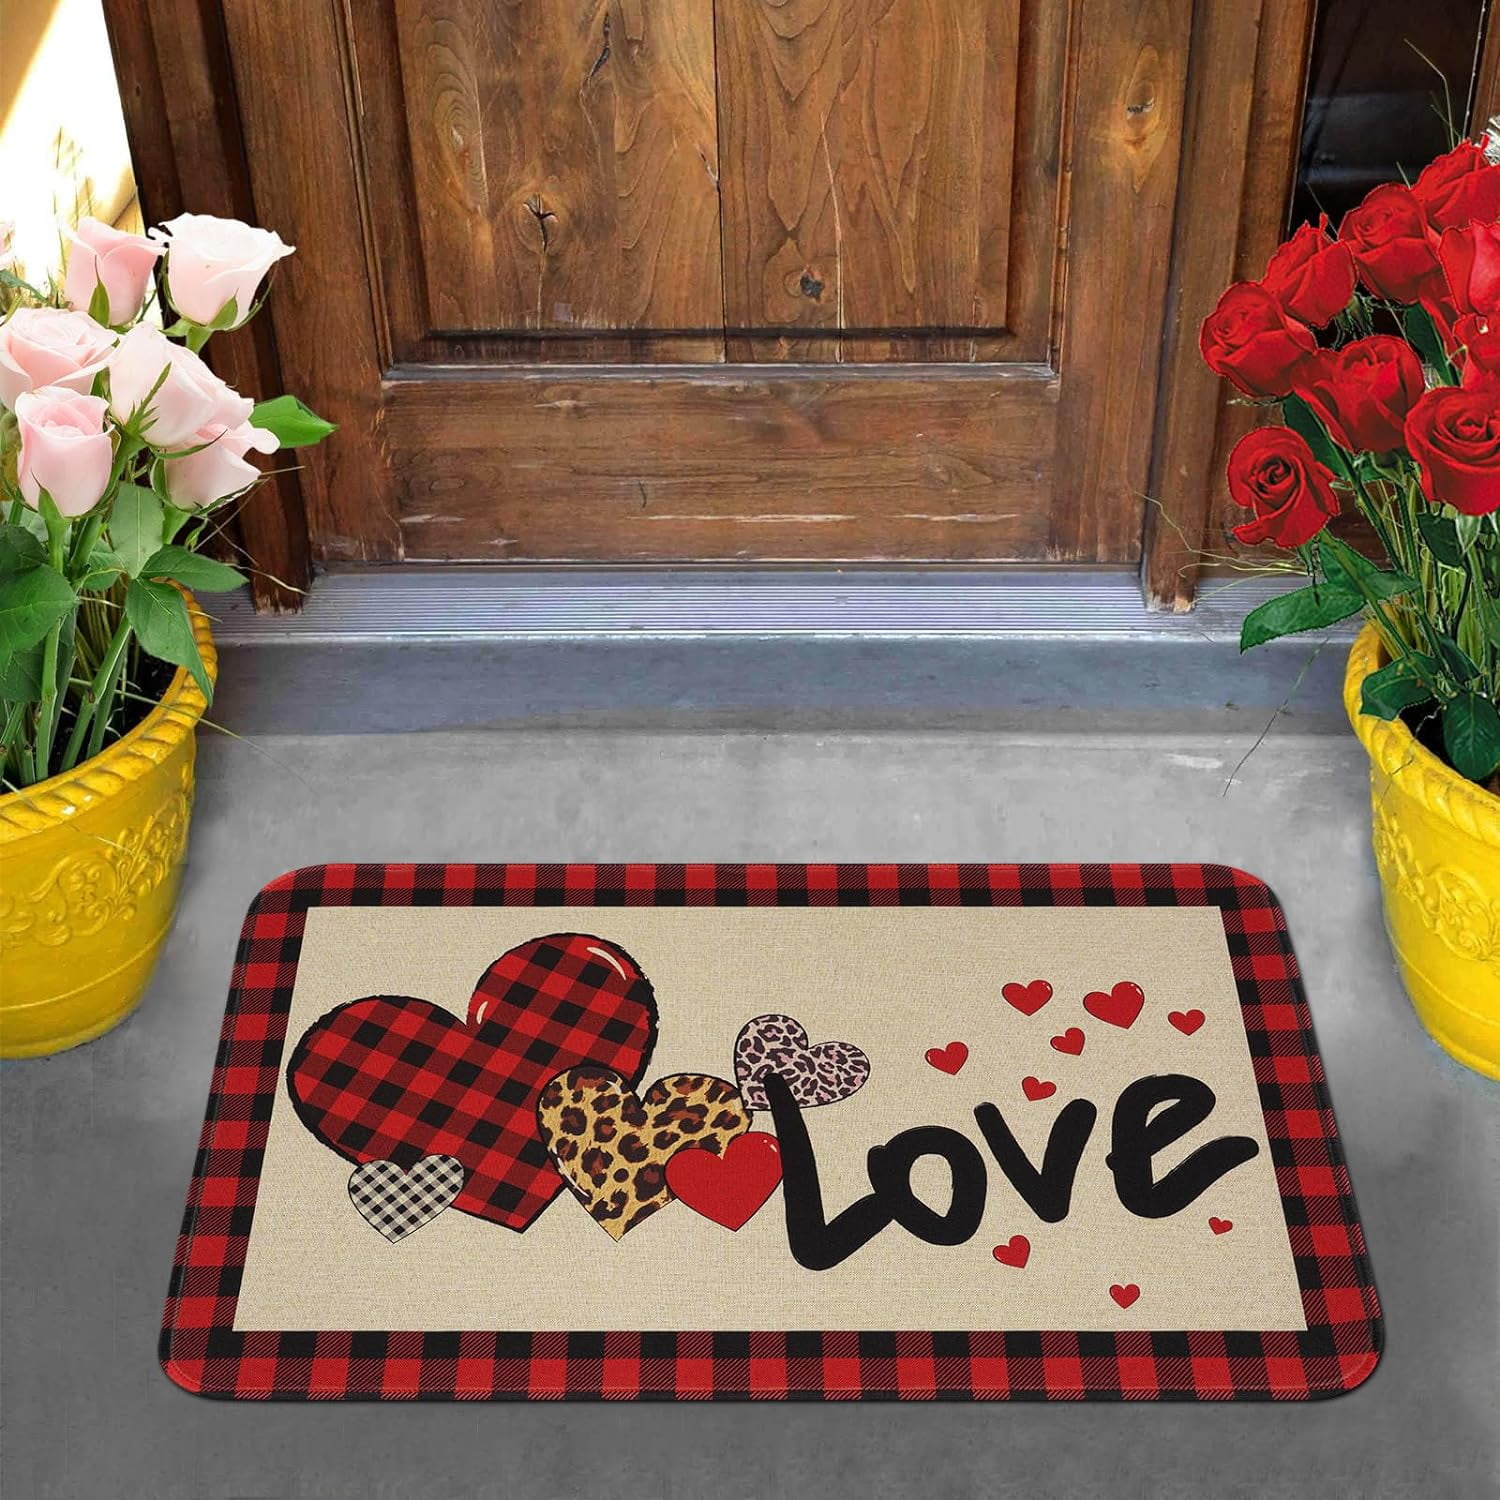  IOHOUZE Black White Striped Rug -3x5 Front Door Mats Outdoor,Washable  Rug for Front Porch Decor,Spring Summer Welcome Mats Outdoor Indoor, Doormat  for Farmhouse/Entryway/Home Entrance : Home & Kitchen